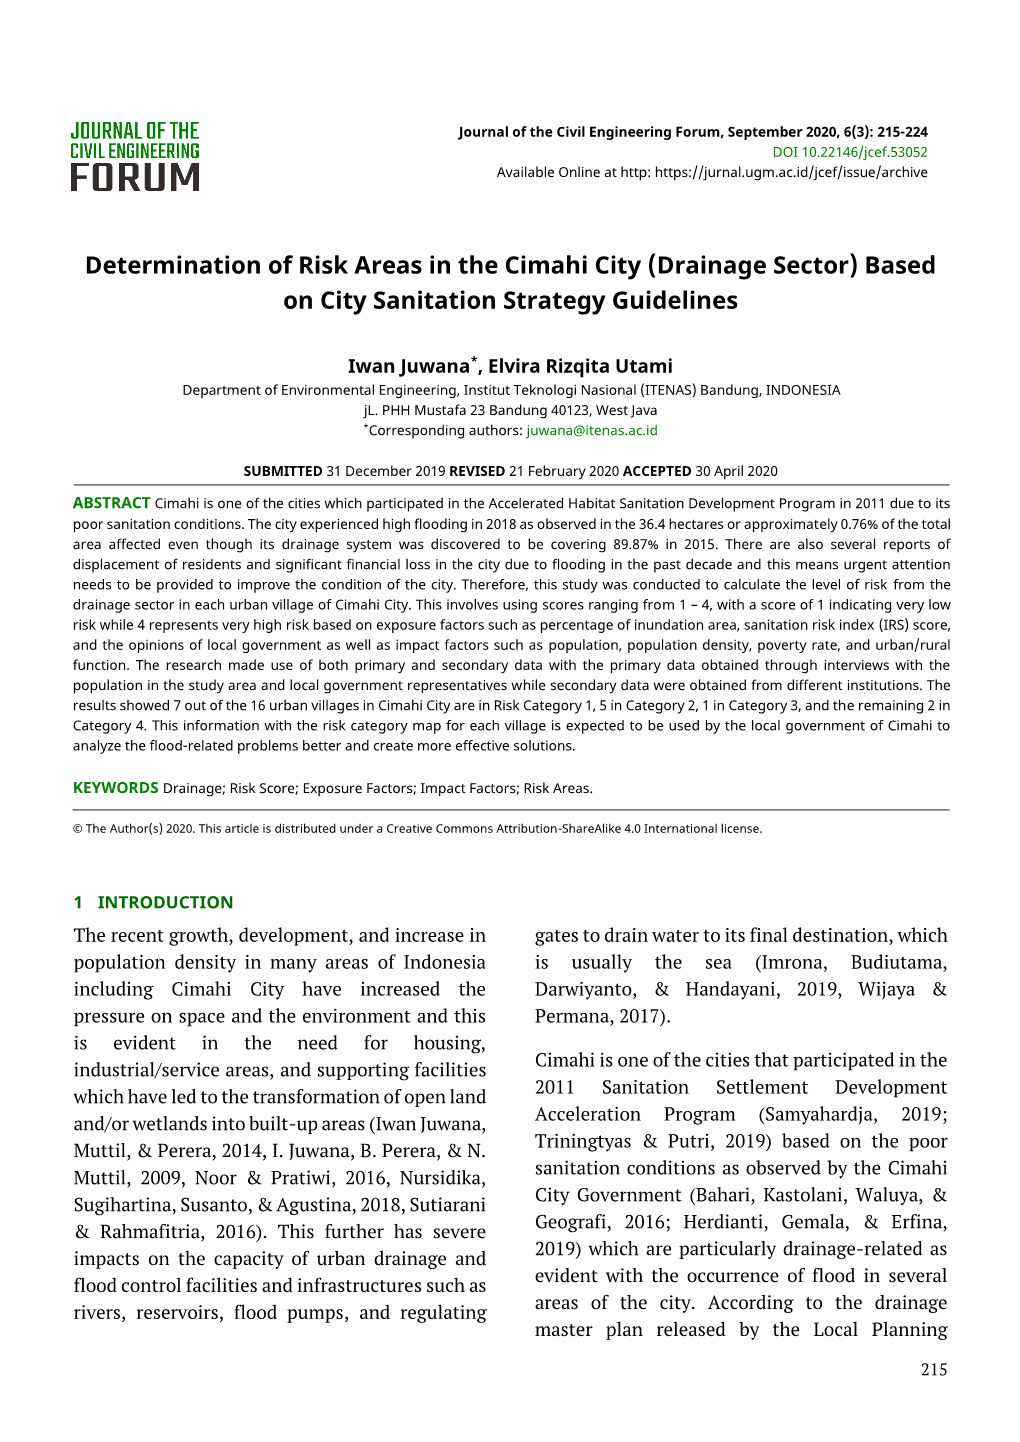 Determination of Risk Areas in the Cimahi City (Drainage Sector) Based on City Sanitation Strategy Guidelines